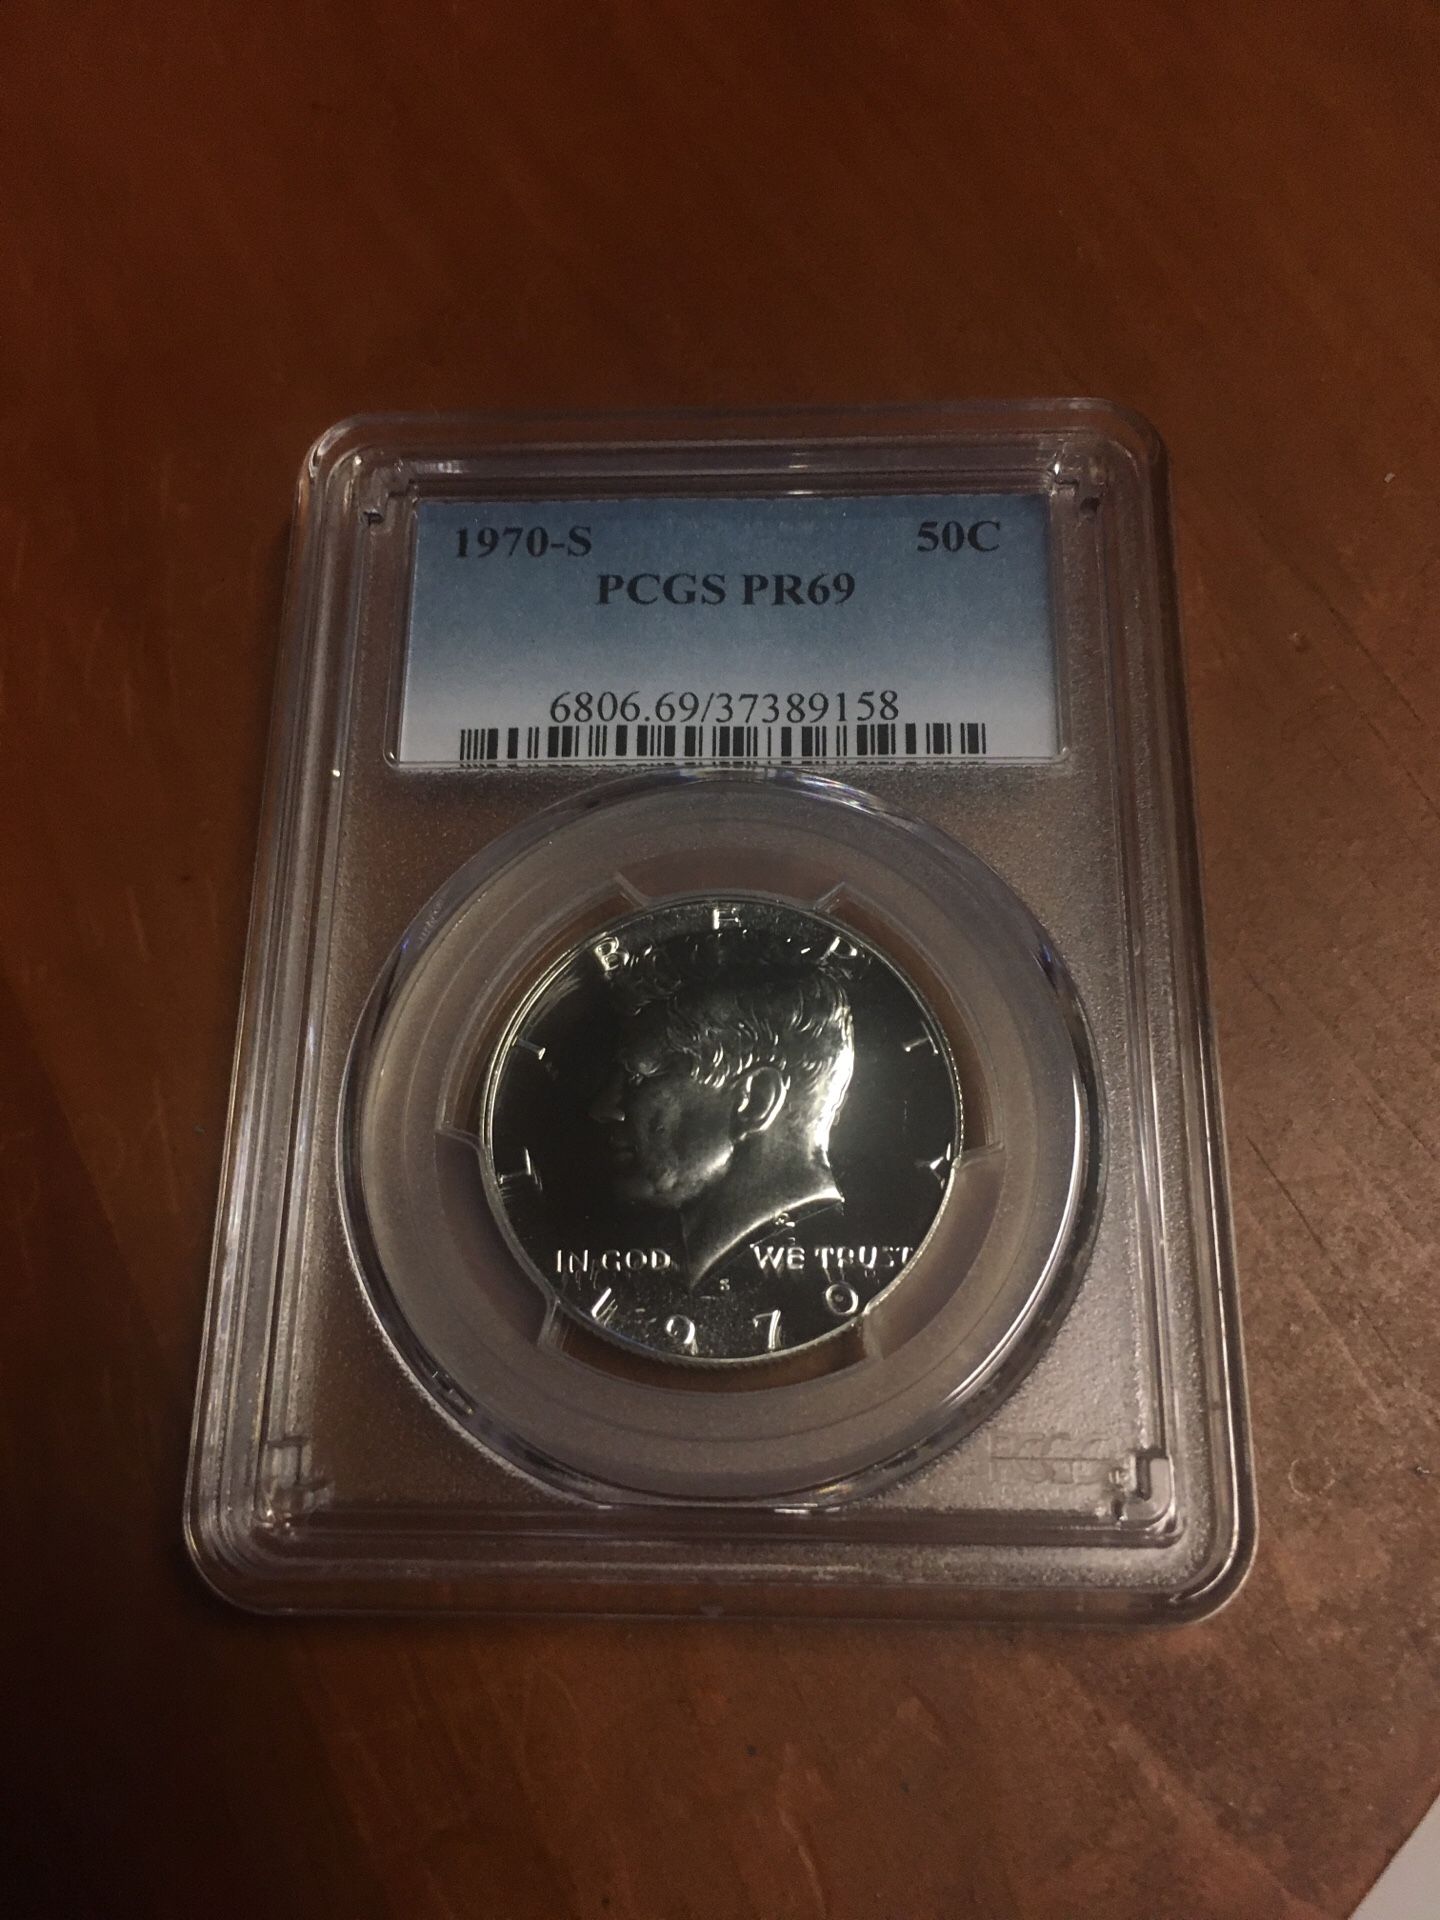 1970S PCGS PROOF69 50C piece!!!! This is a 2 Coin Lot